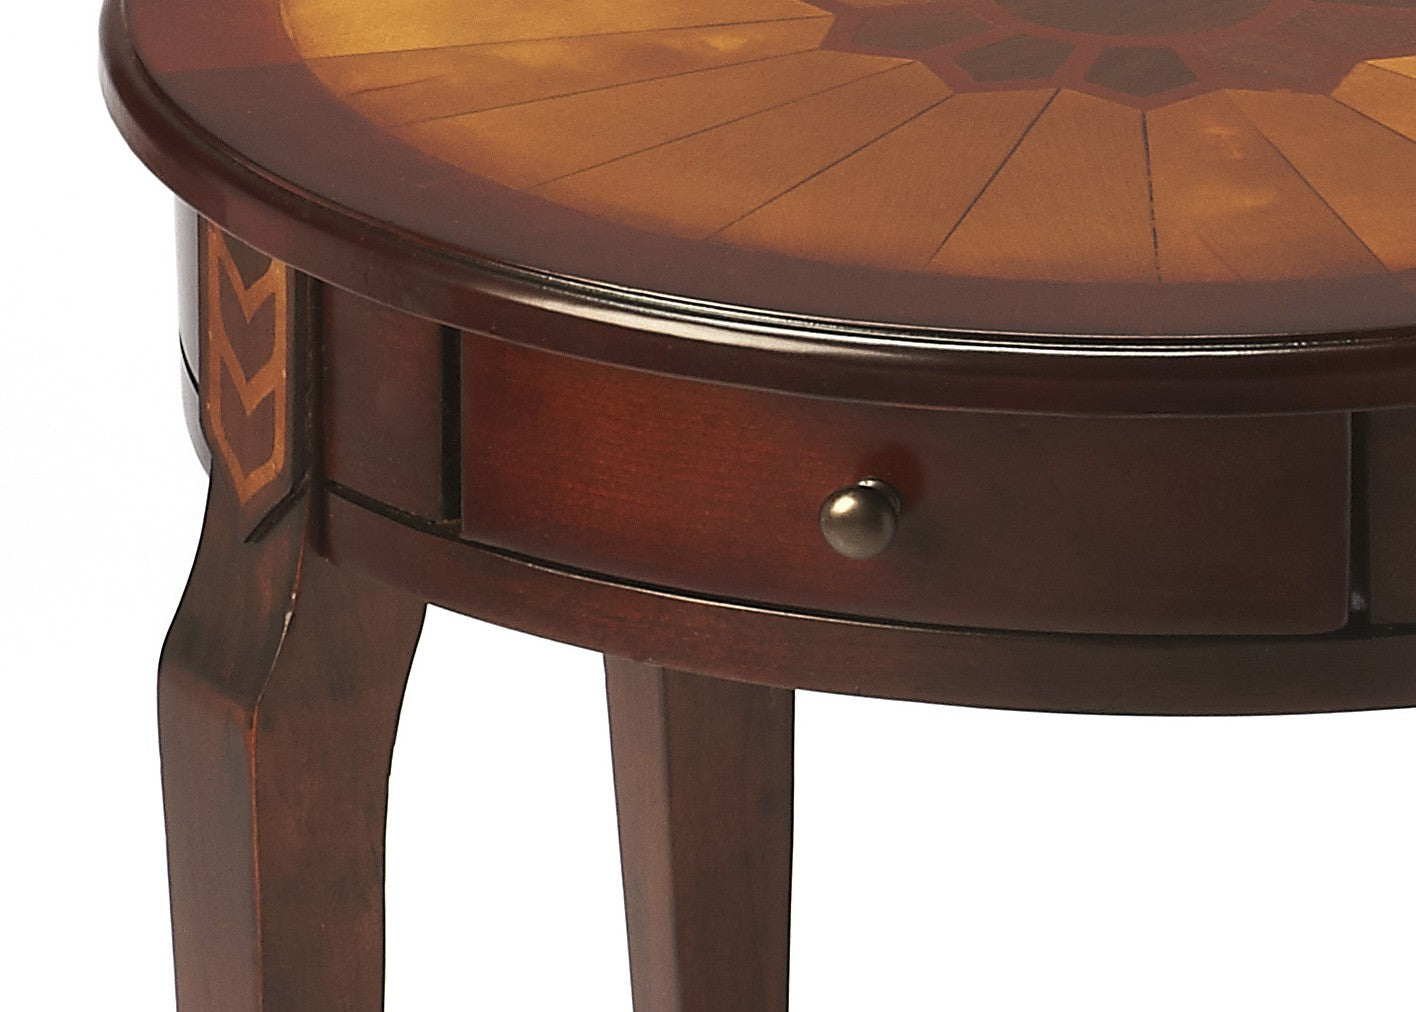 Cherry With Maple Inlay Round Accent Table By Homeroots